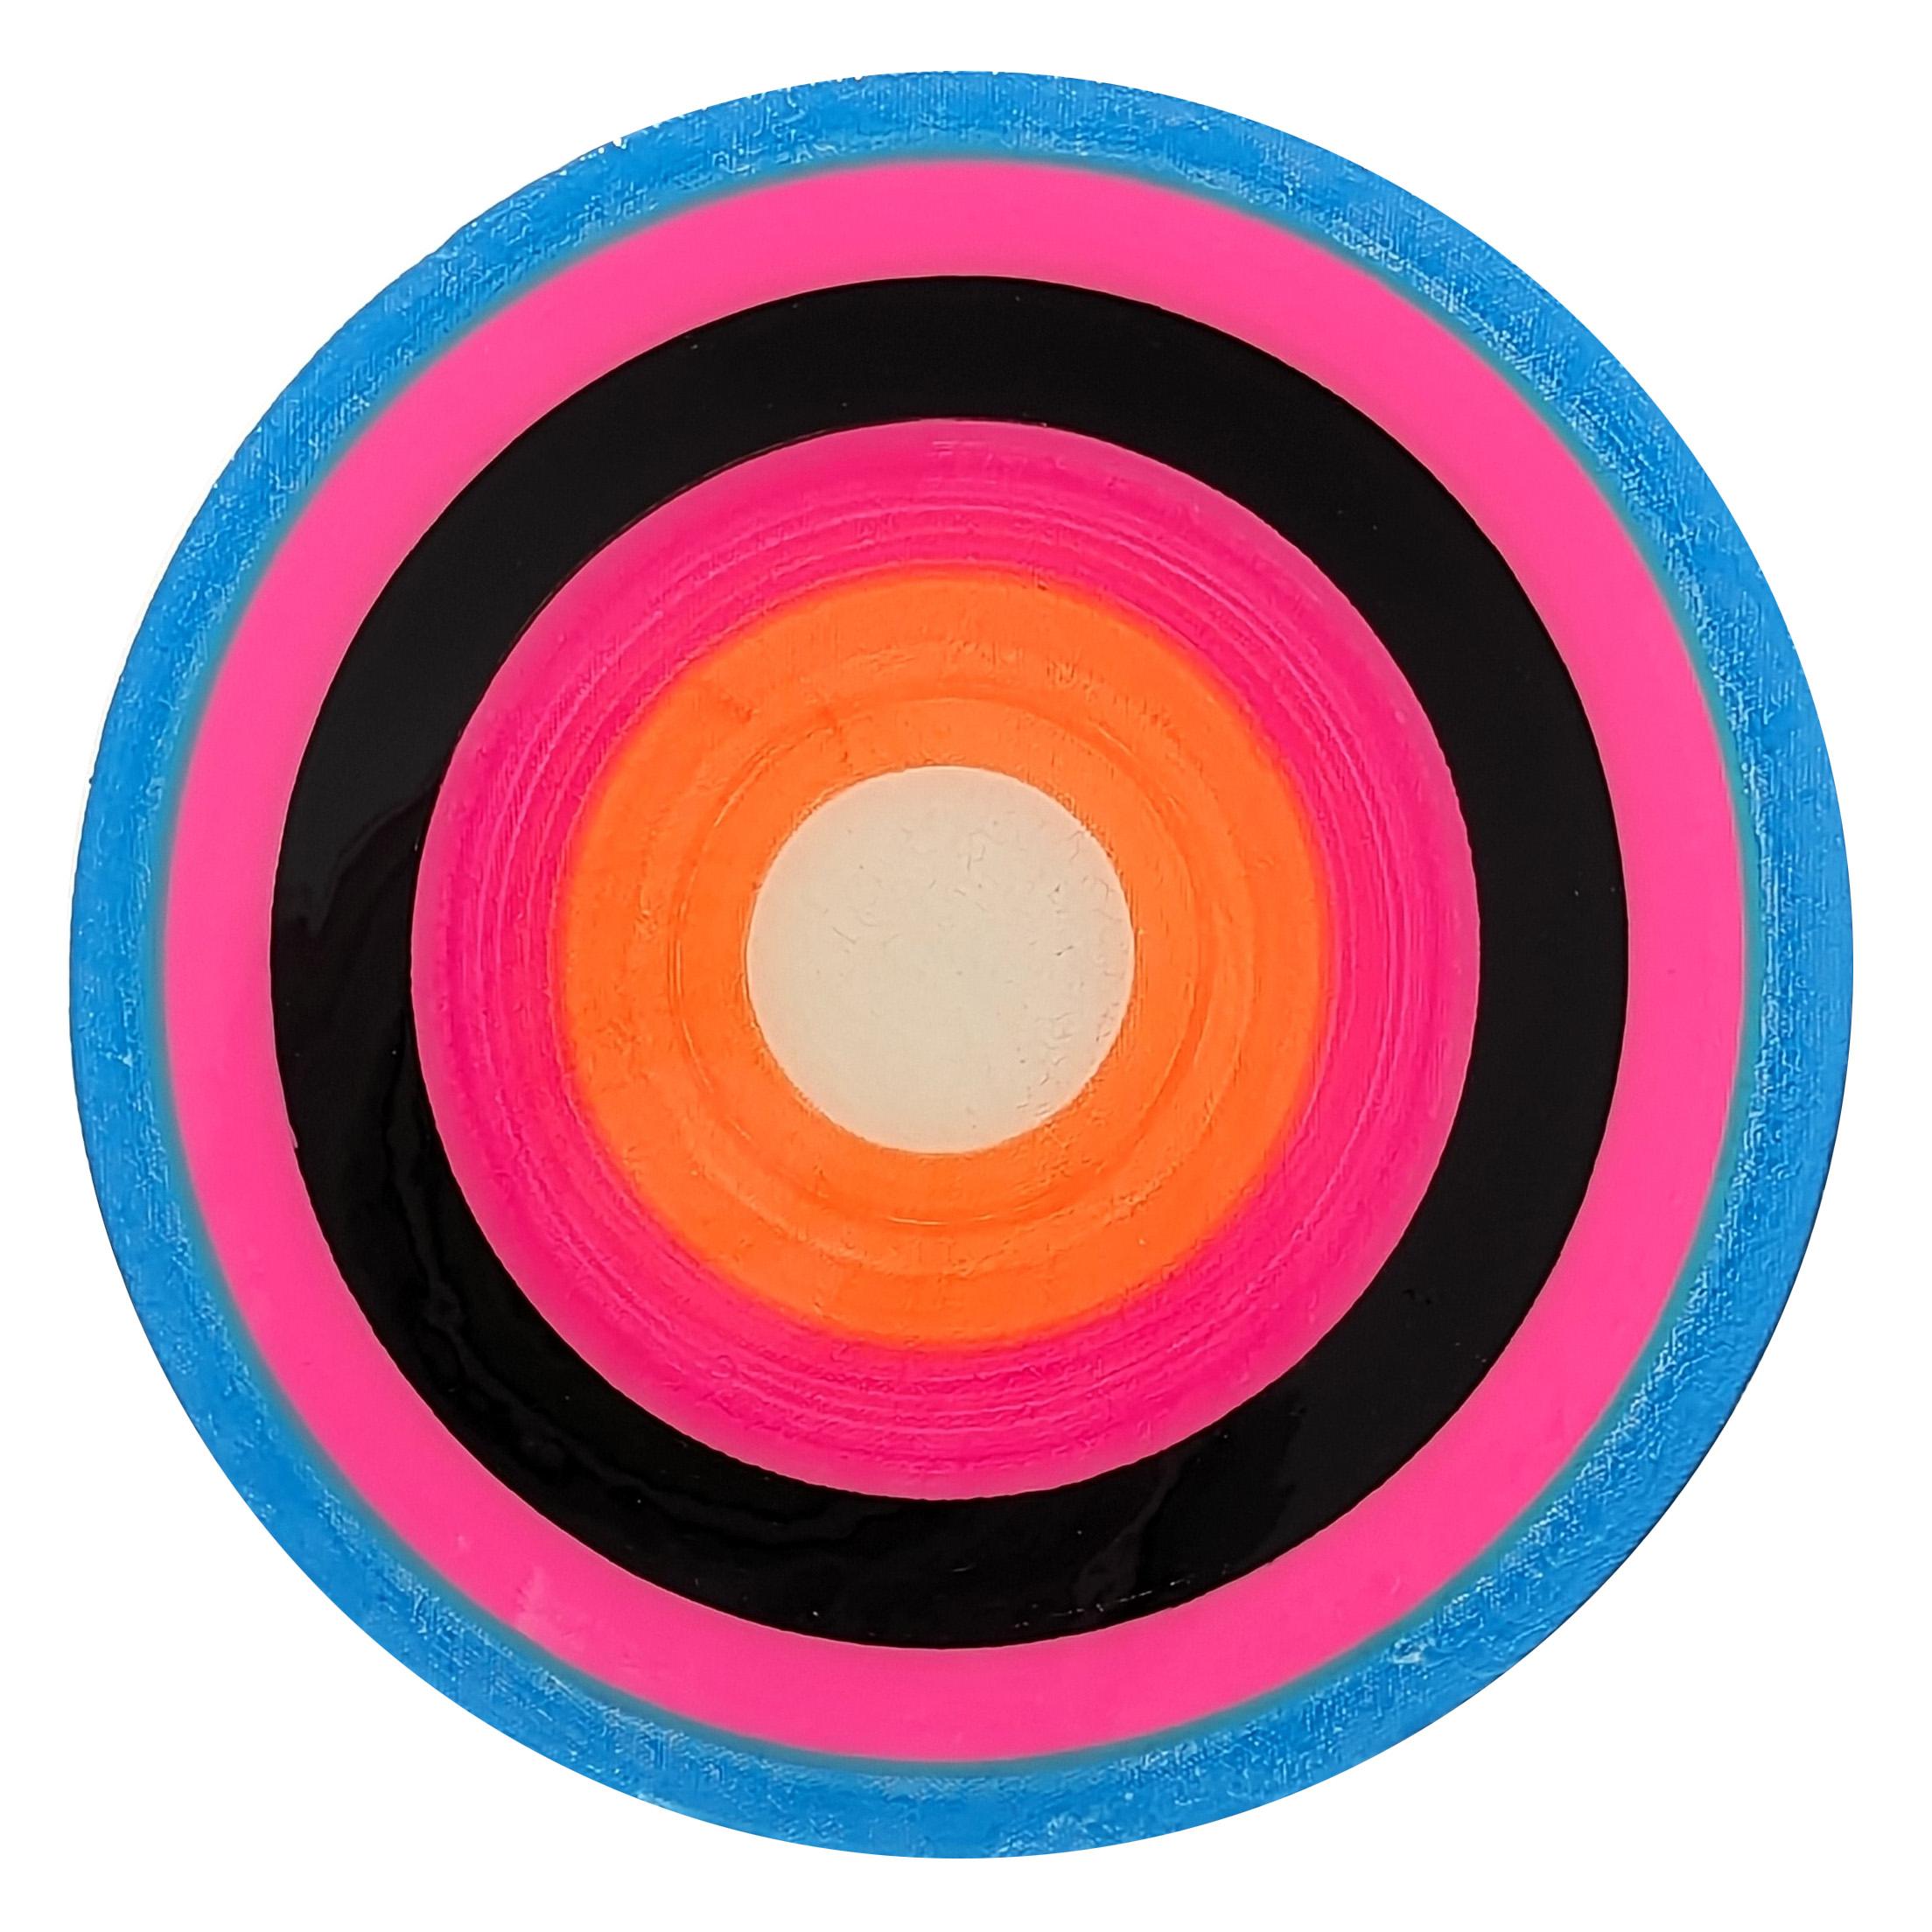 "Study for a Song 5" Contemporary Colorful Abstract Concentric Circle Painting - Mixed Media Art by David Hardaker